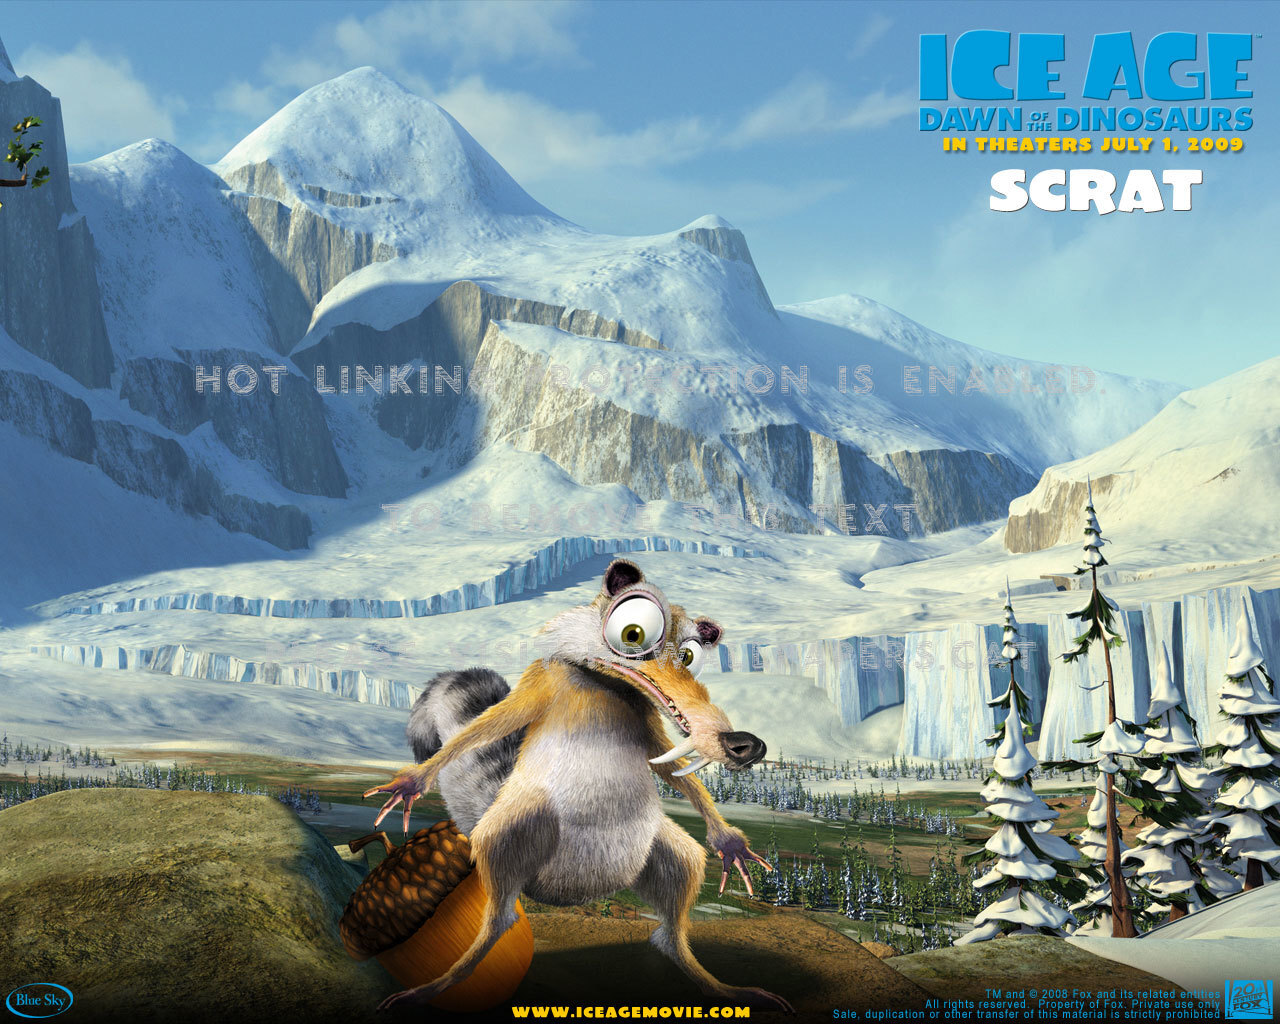 ice age 3 dawn of the dinosaurs scrat 20th